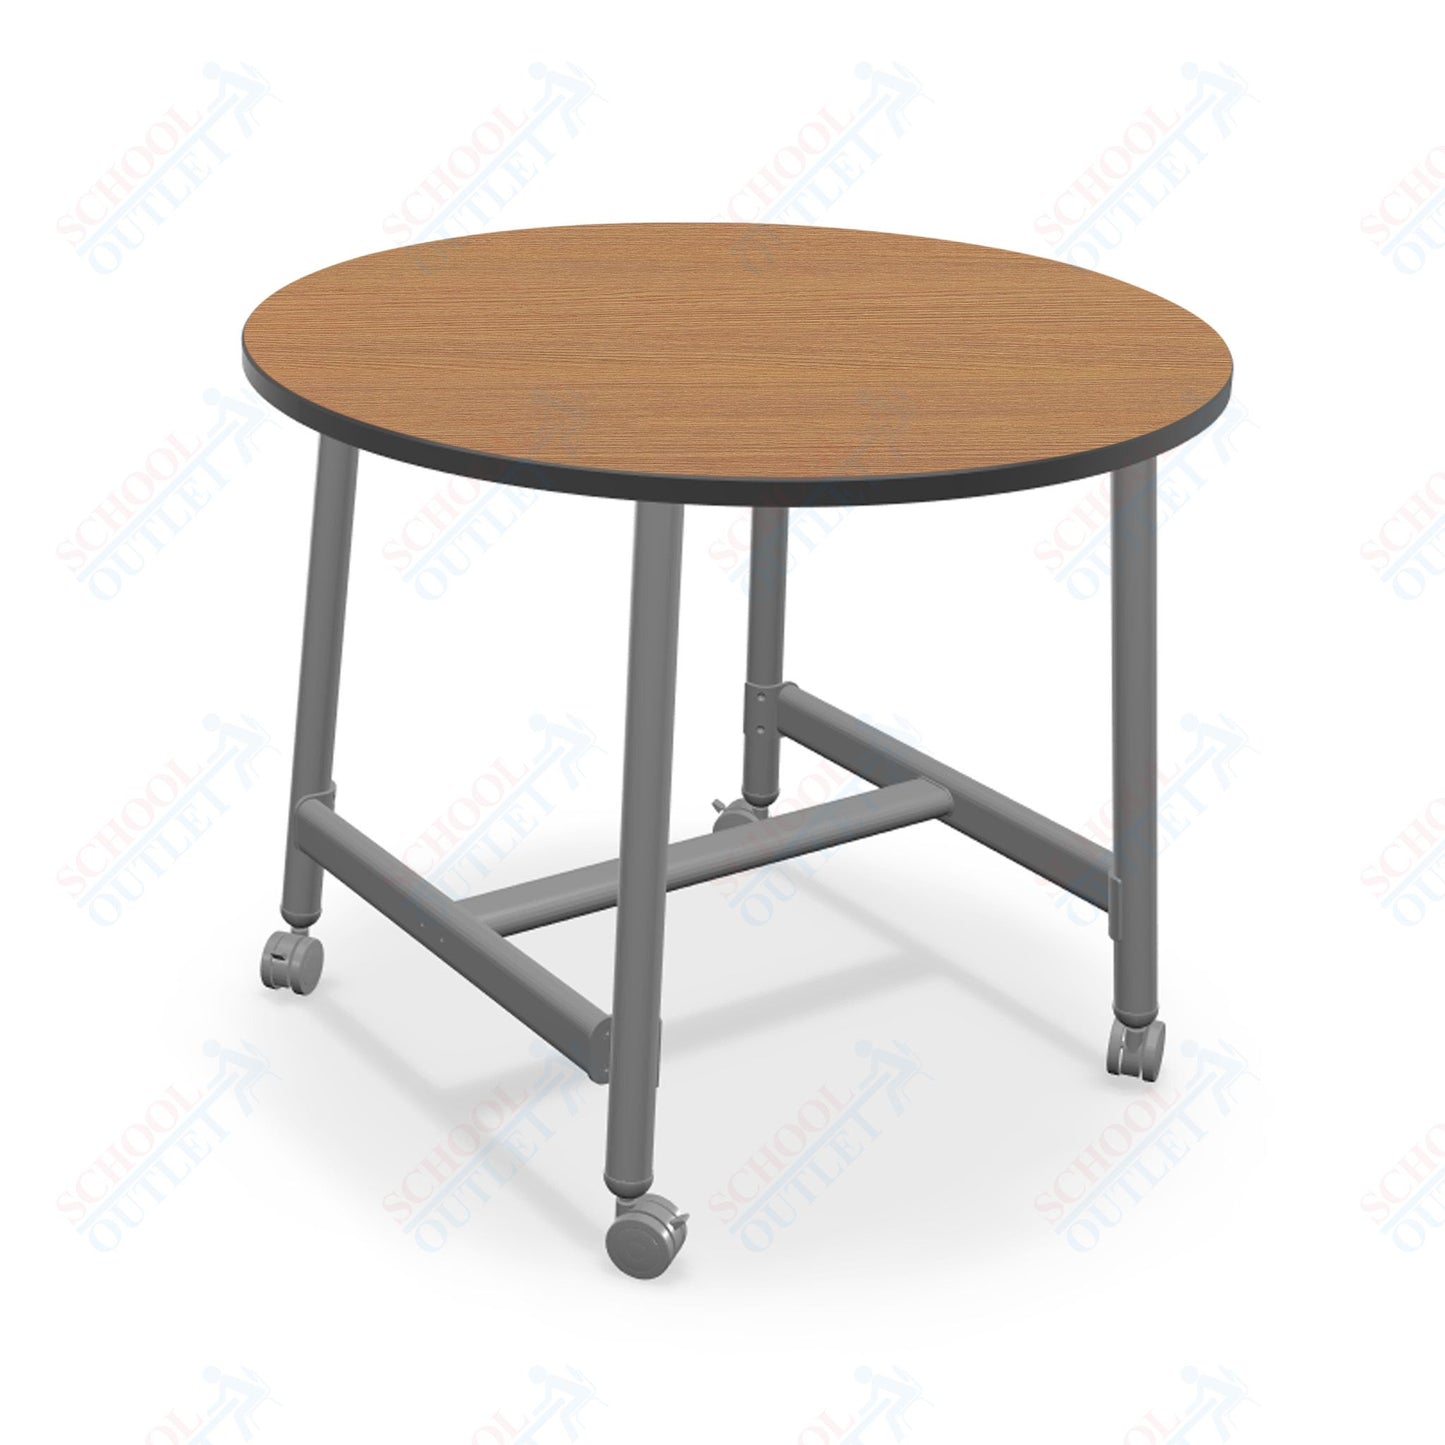 Mooreco Akt Table – 36" Round, Laminate Top, Fixed Height Available in 29"H, 36"H, or 42"H